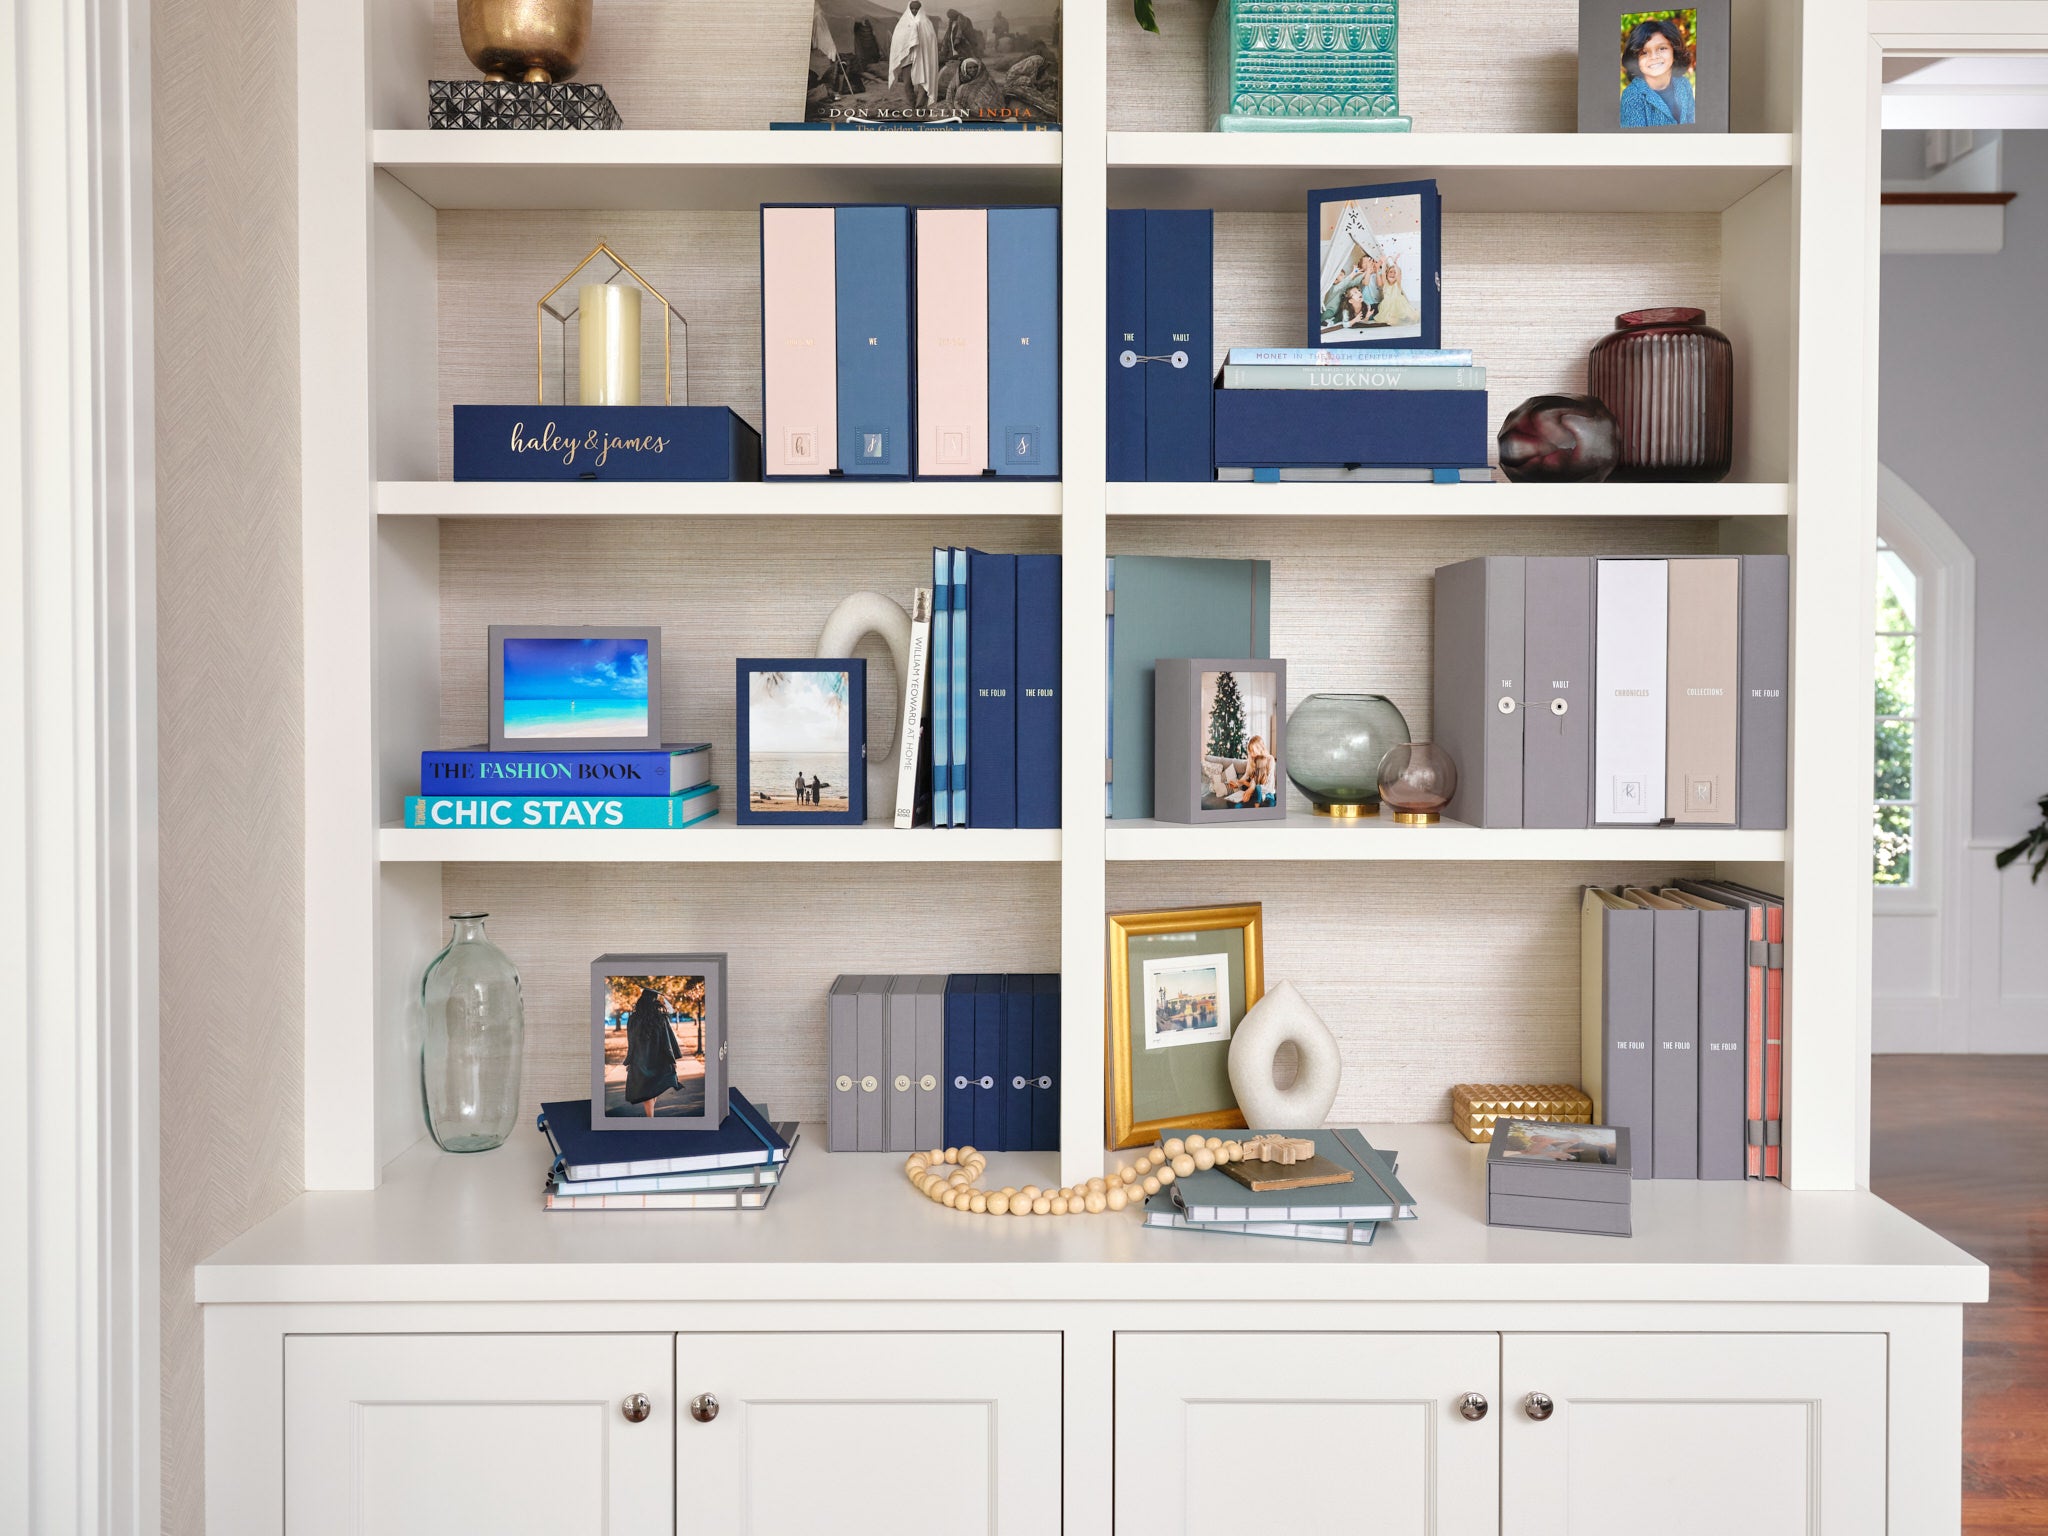 Savor organizers in blue and grey on a shelf, with other house decoration around